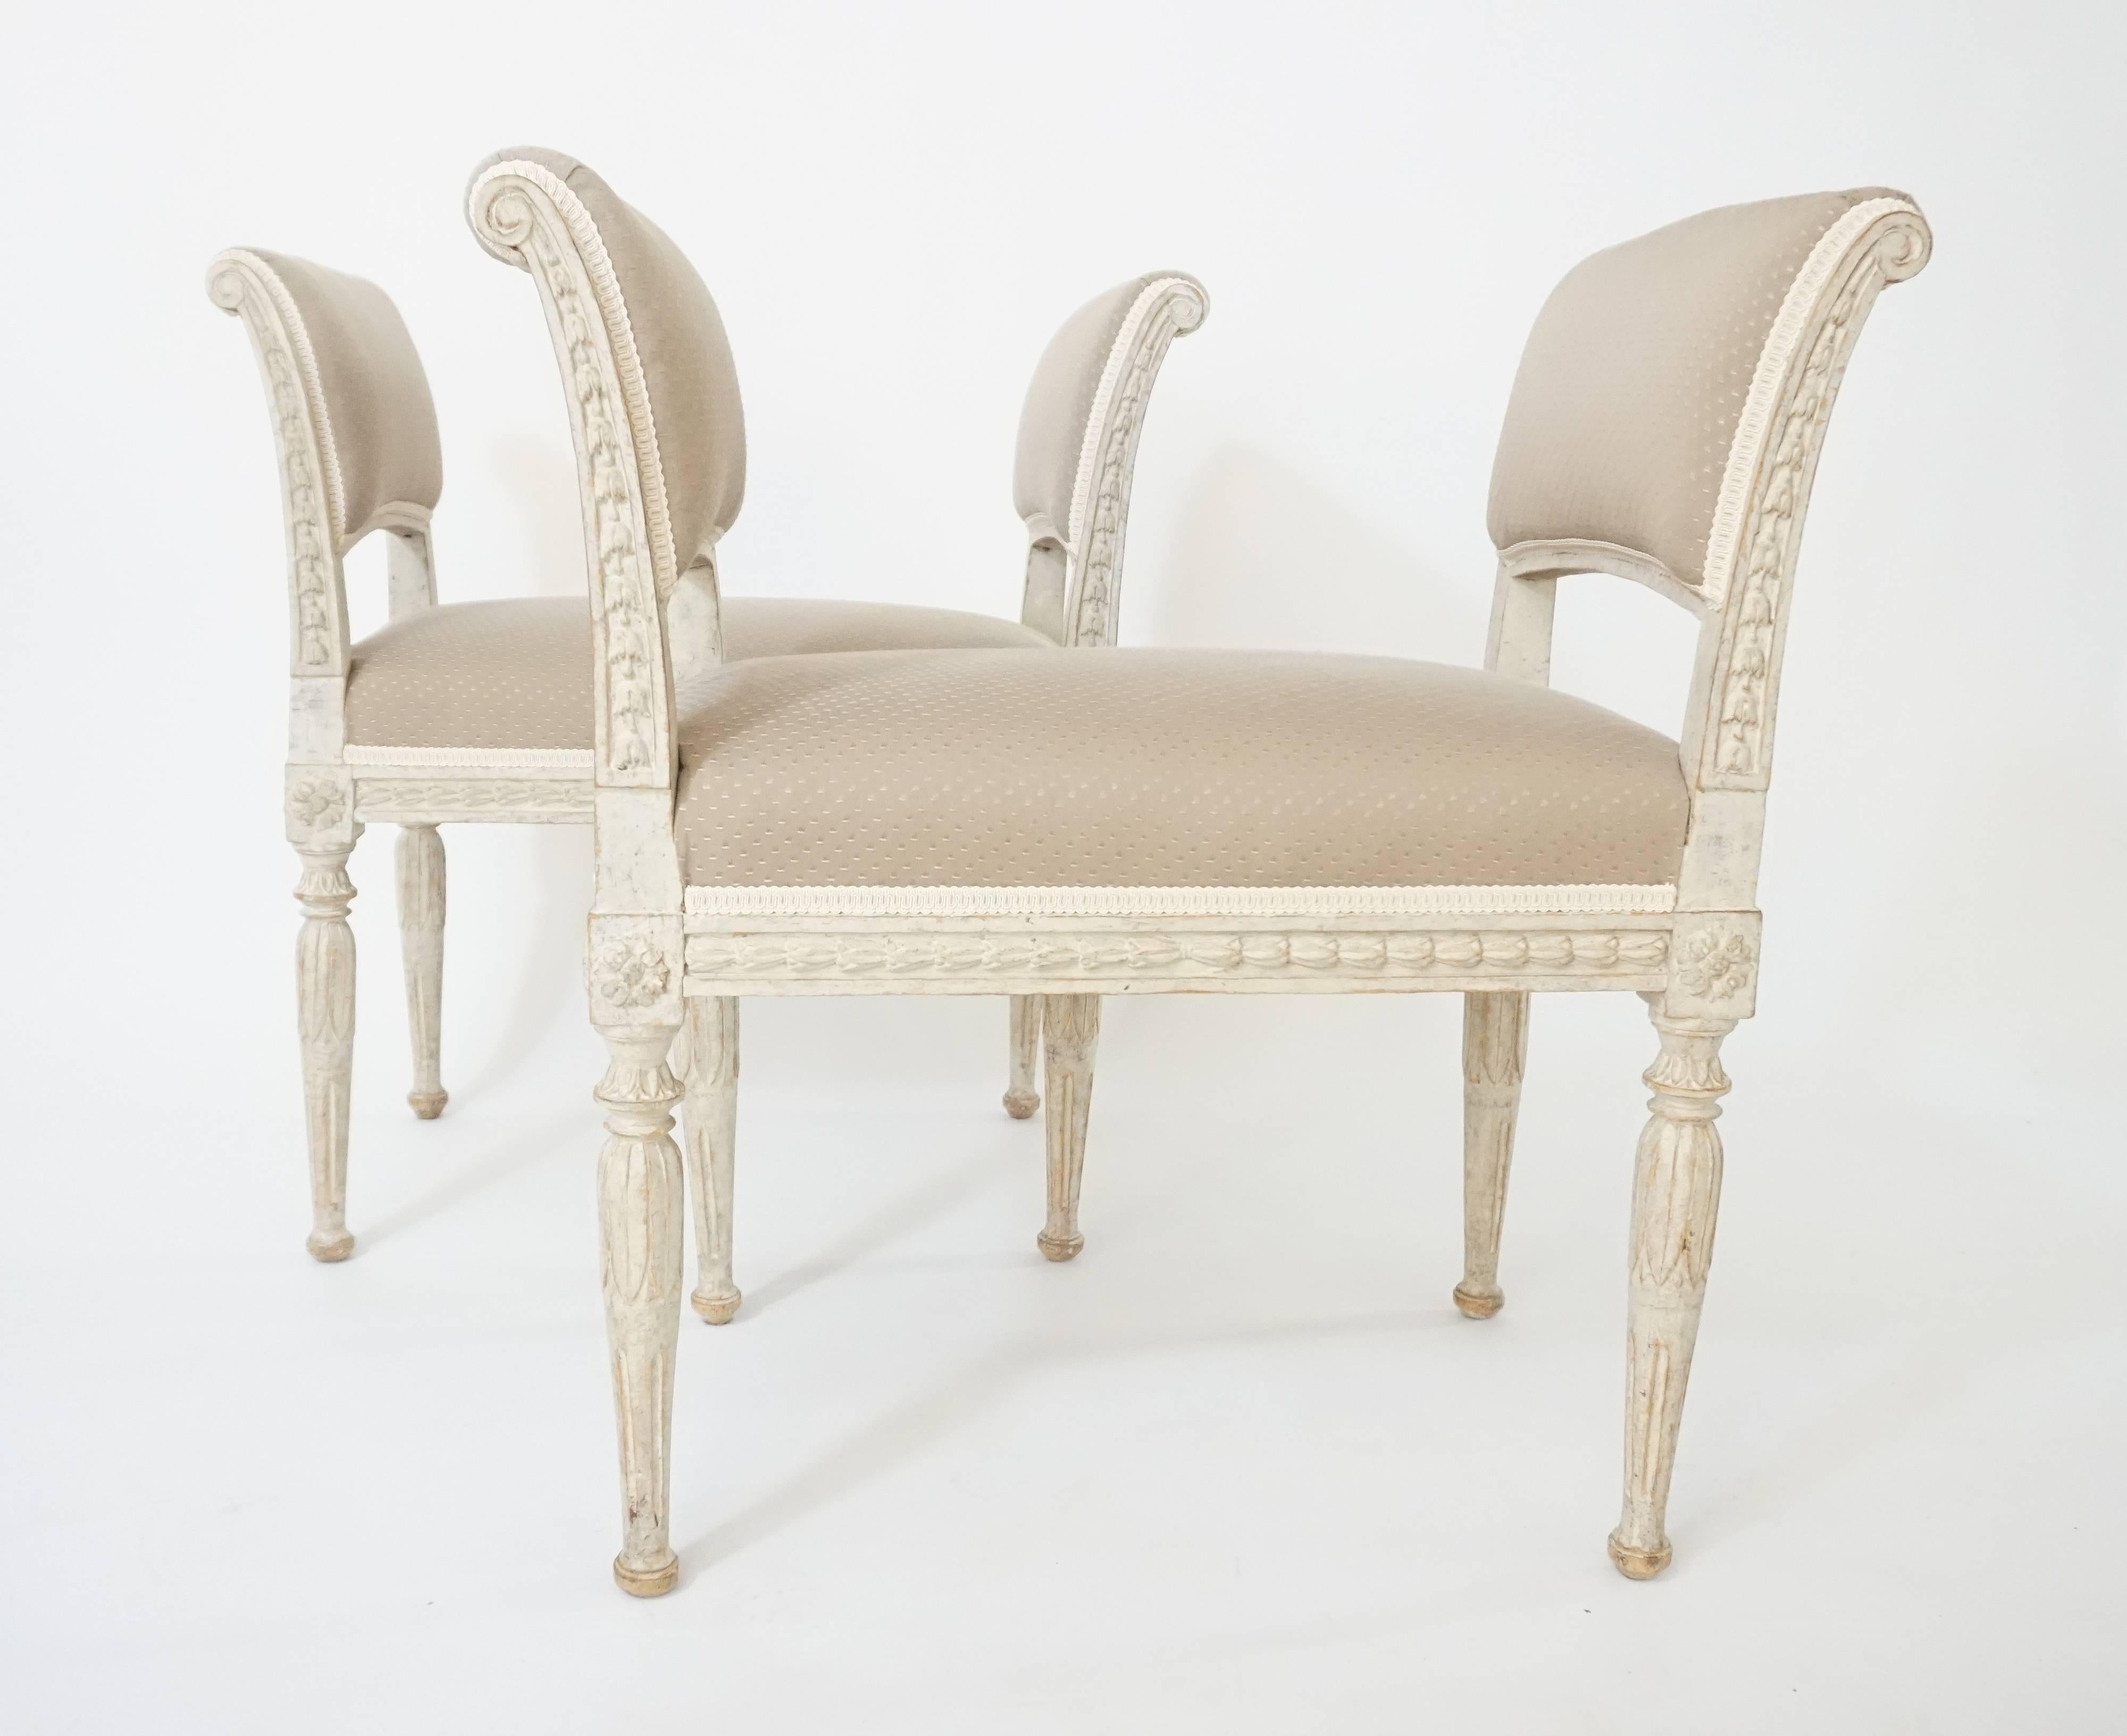 An elegant and rare pair of circa 1790 Swedish Gustavian period and style neoclassical benches in original paint, possibly by Royal Court chair-maker Ephraim Stahl, of rectangular form having outward scrolling upholstered sides with stiles having